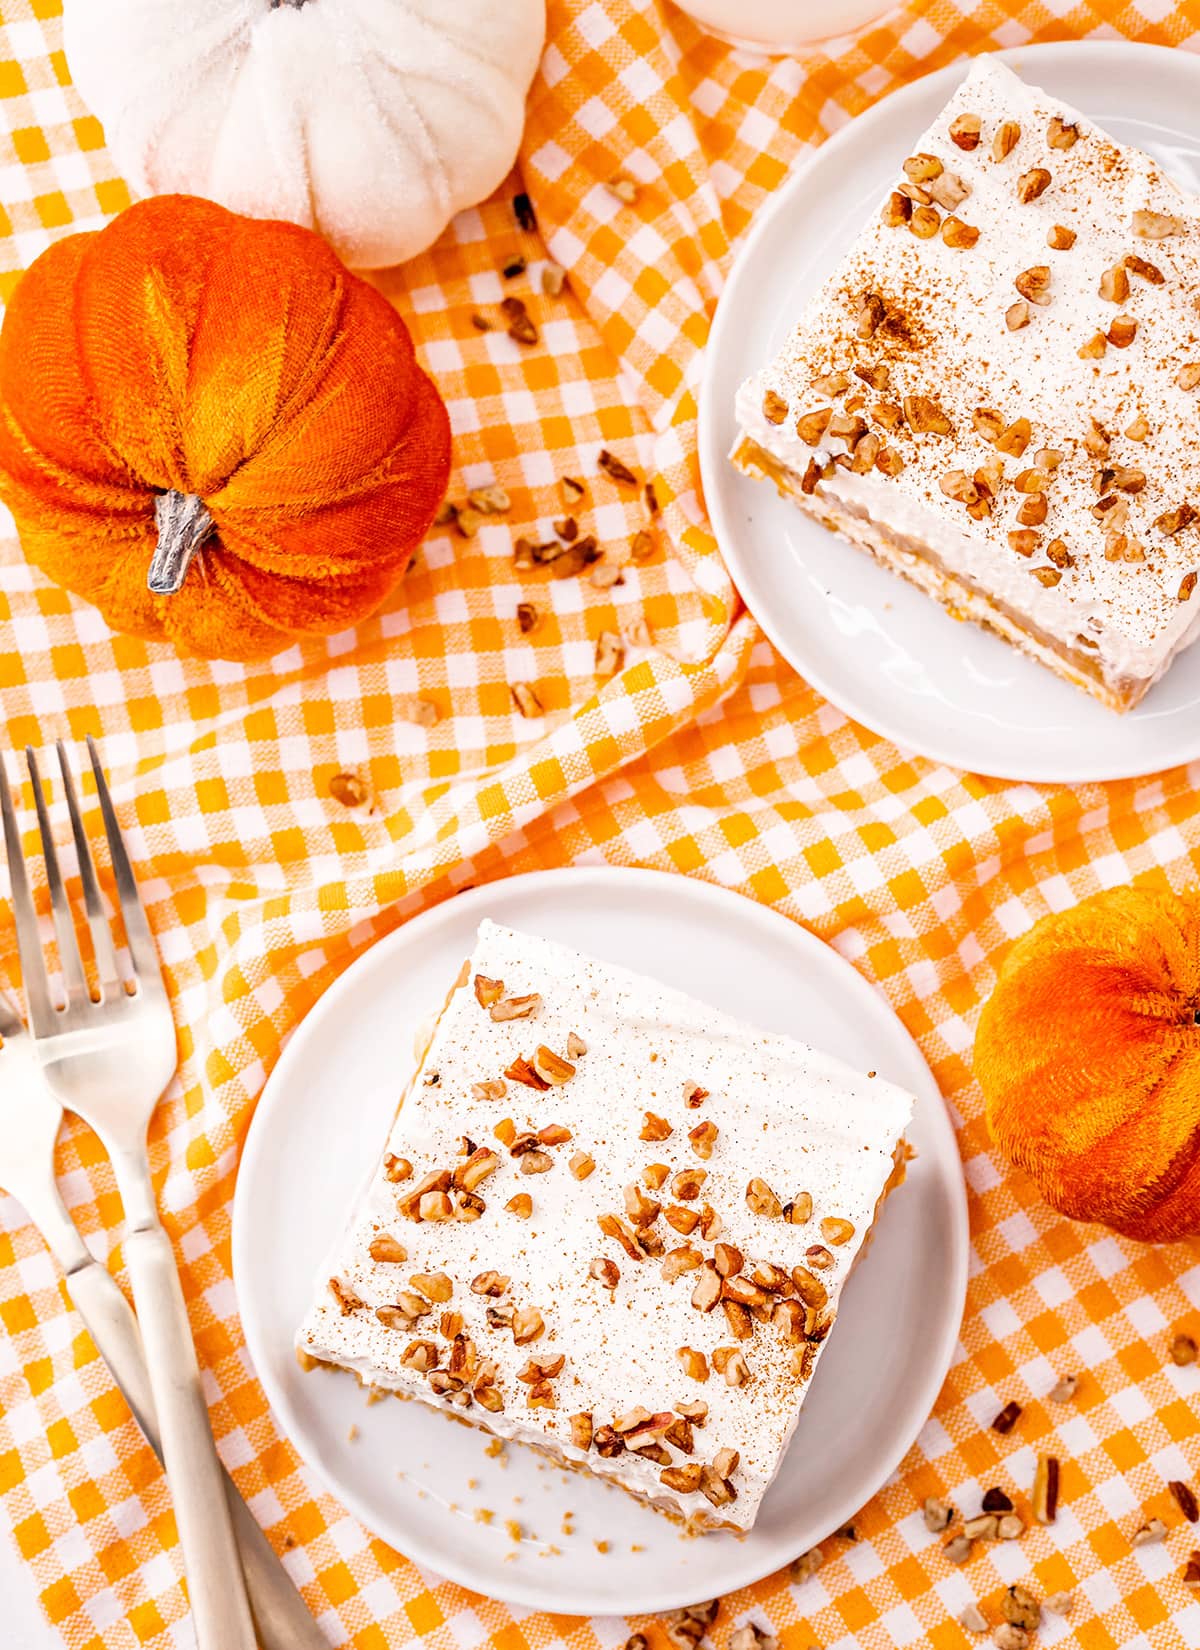 An overhead photo of two pieces of pumpkin delight on plates.